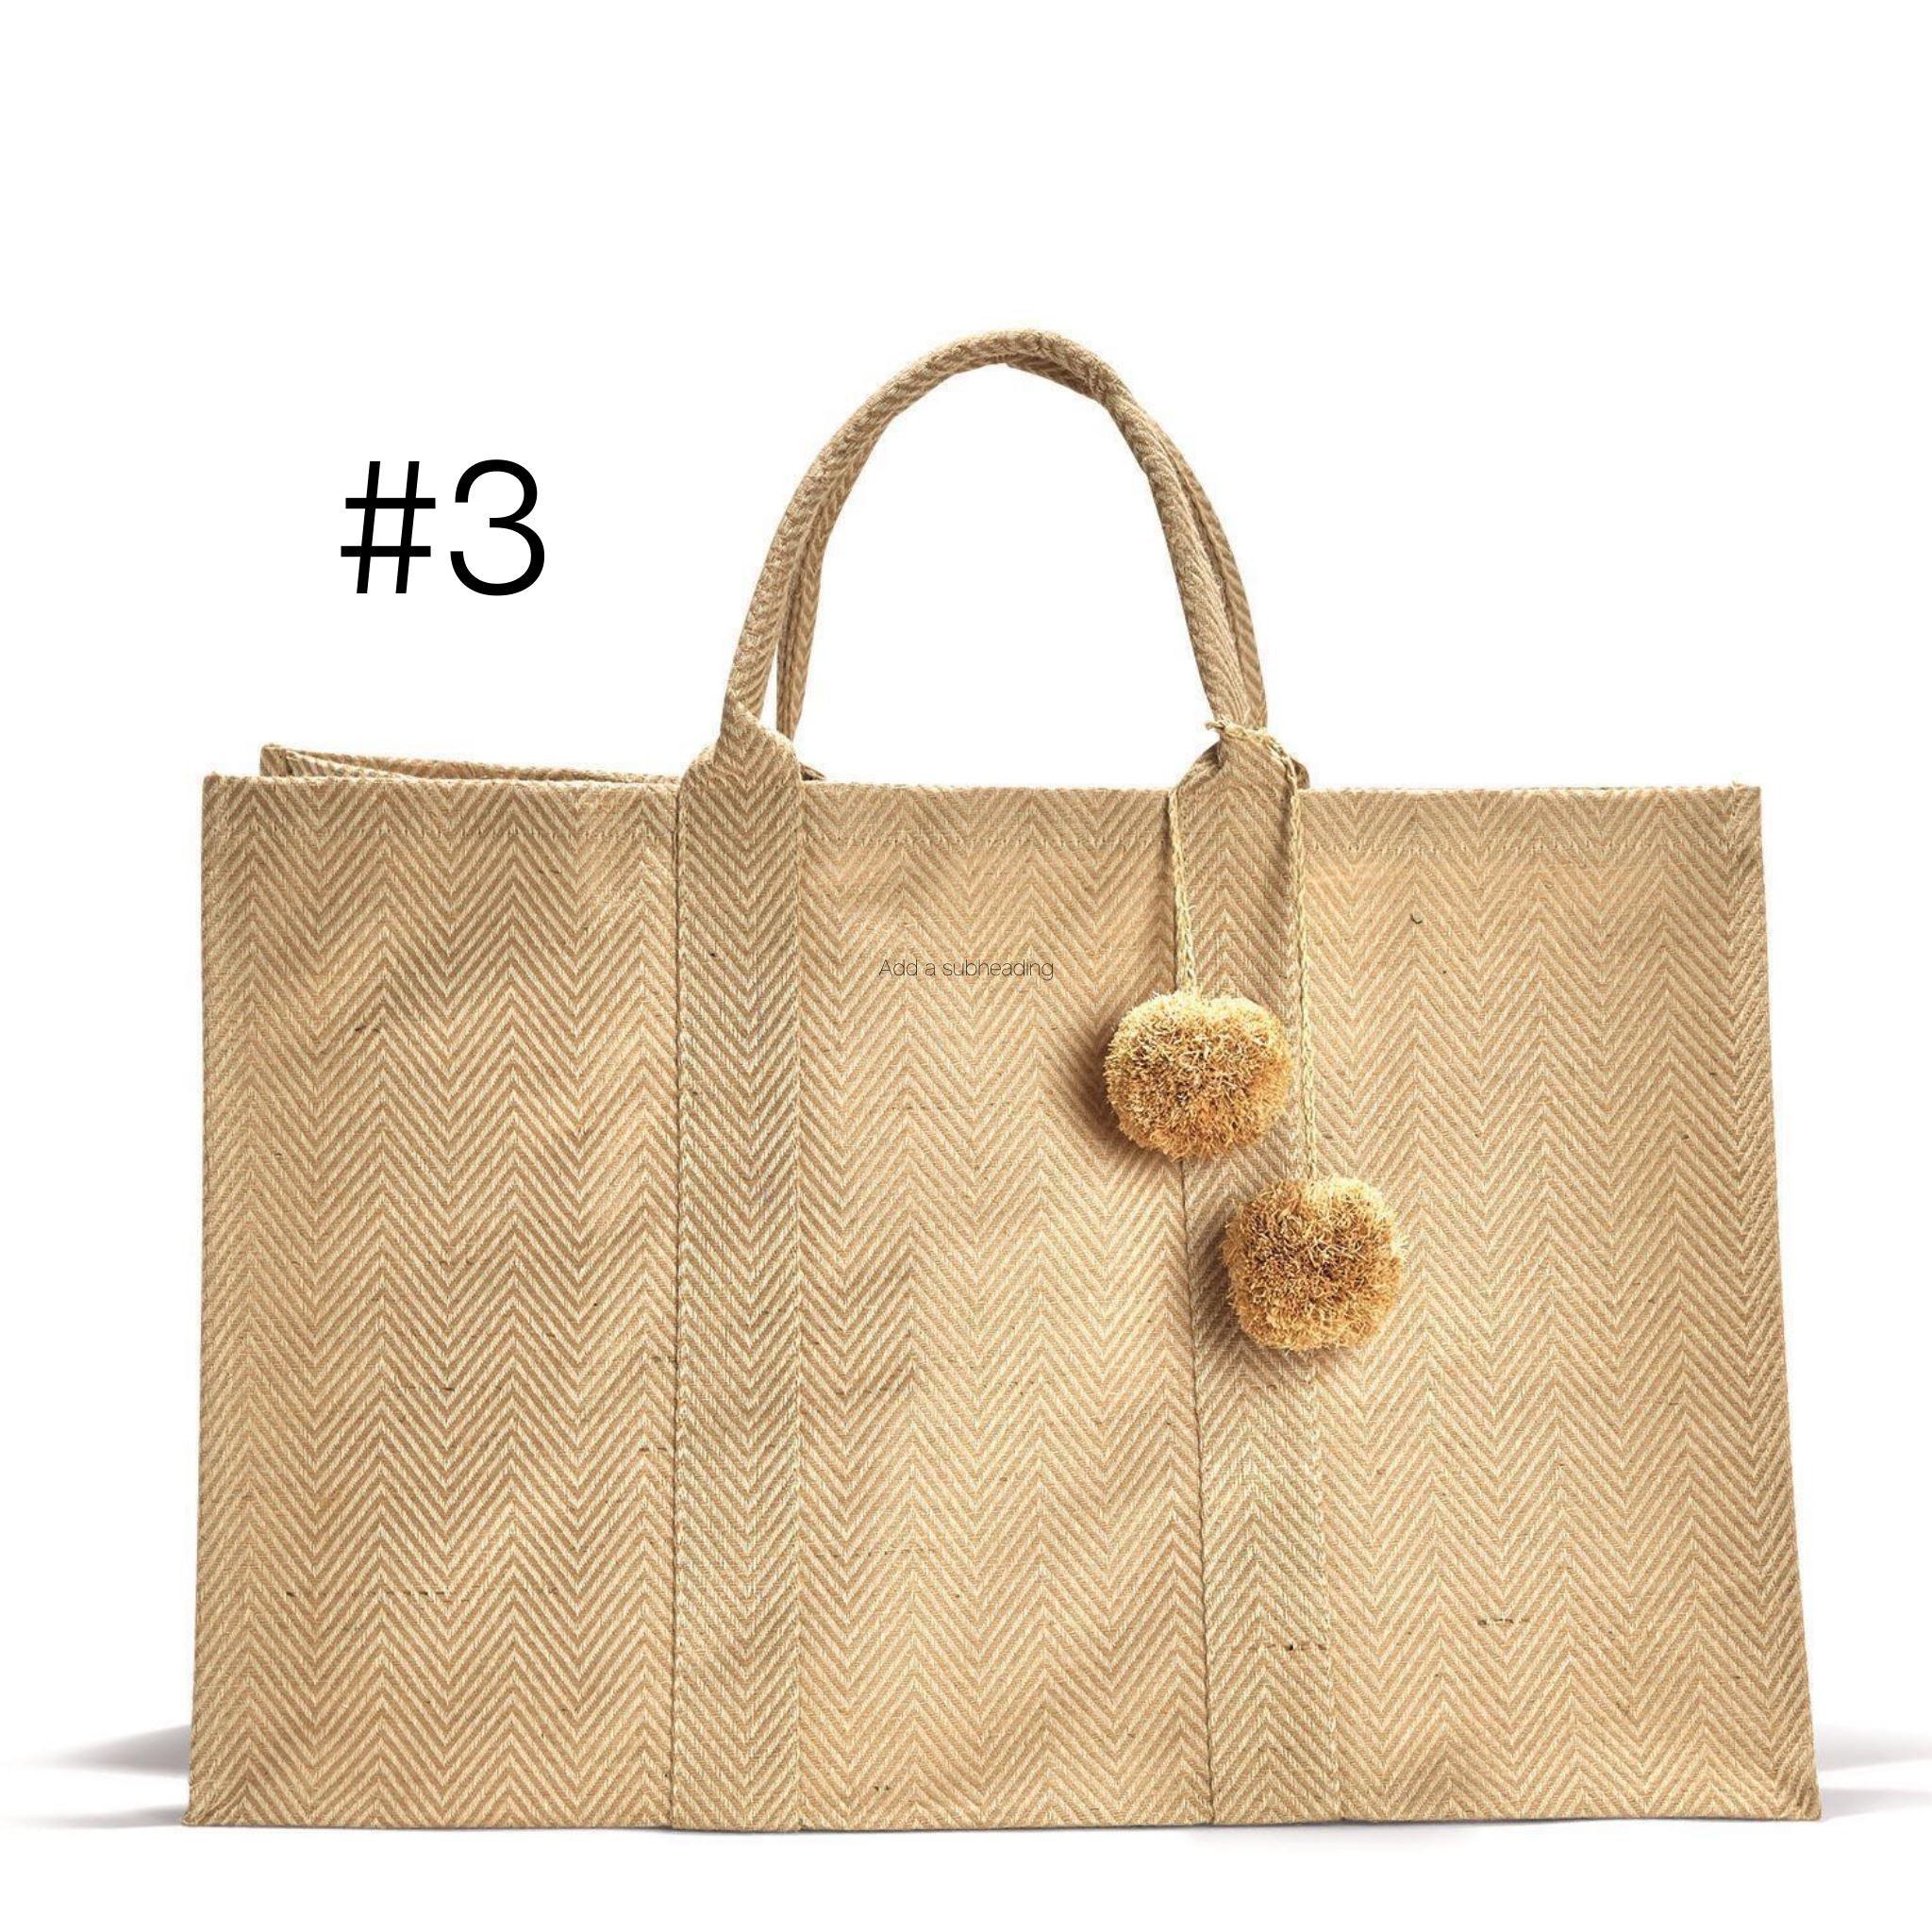 Oversized Tote with Pom Pom Tassel TOTES Two's Company 